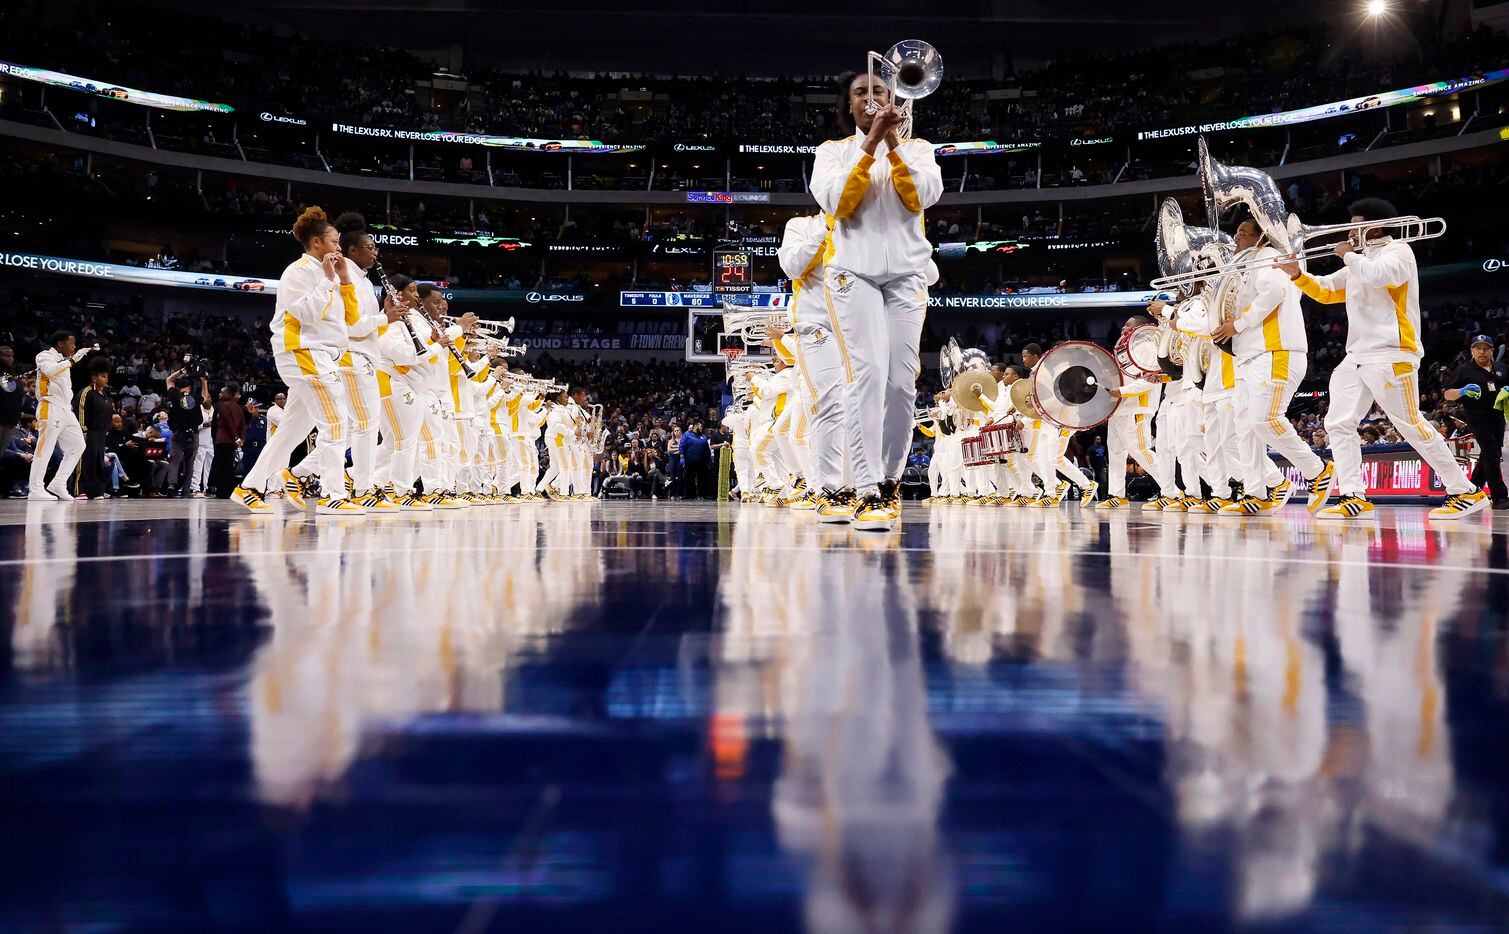 The Grambling State University Tiger Marching Band performs at halftime of the Dallas...